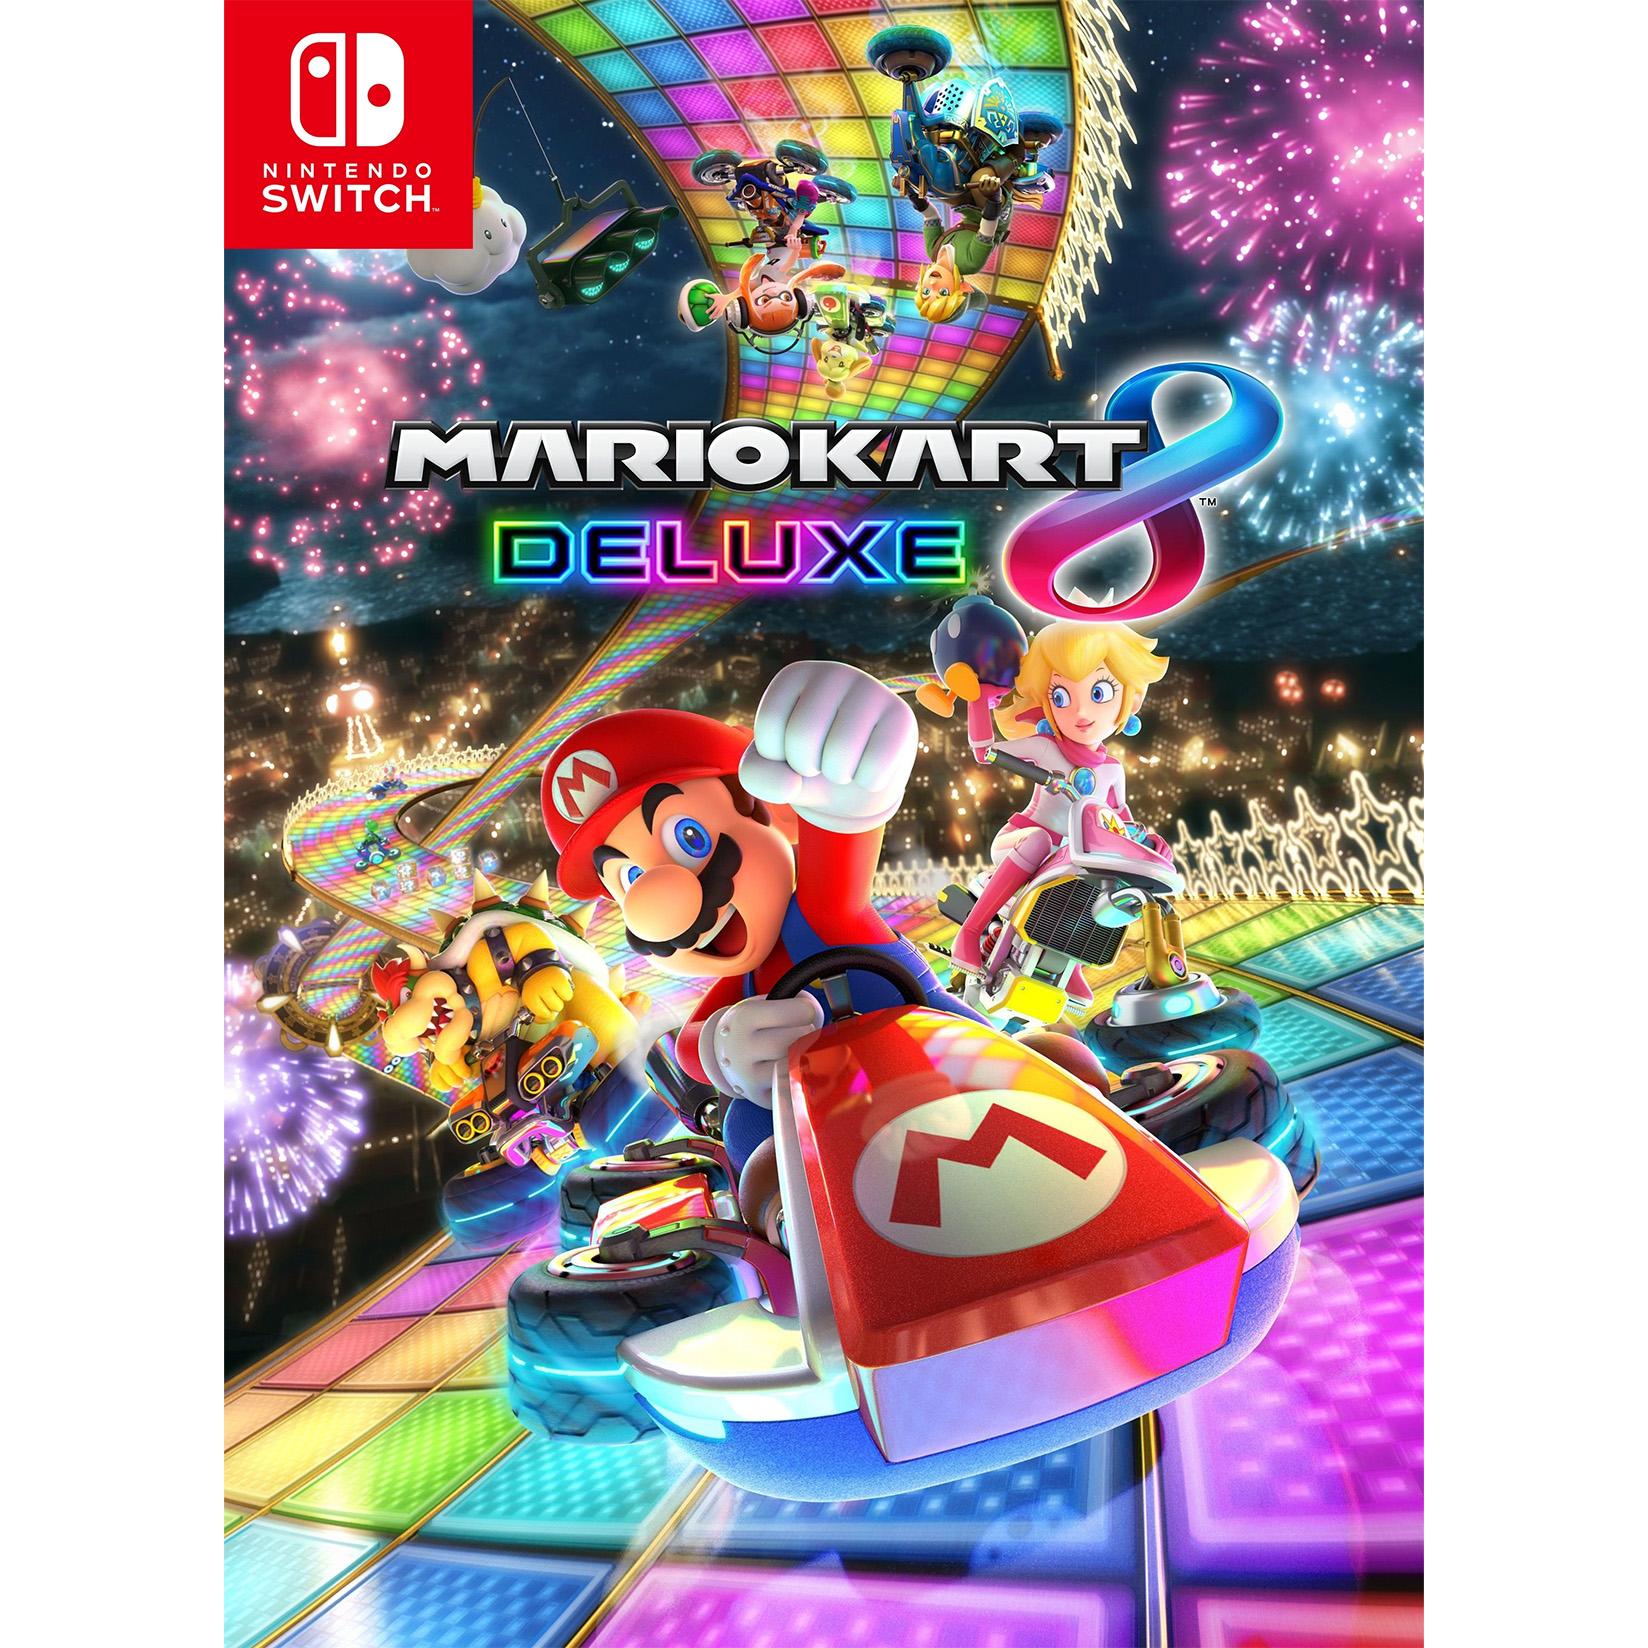 Mario Kart 8 Deluxe with $25 Dell Gift Card for $59.99 Shipped